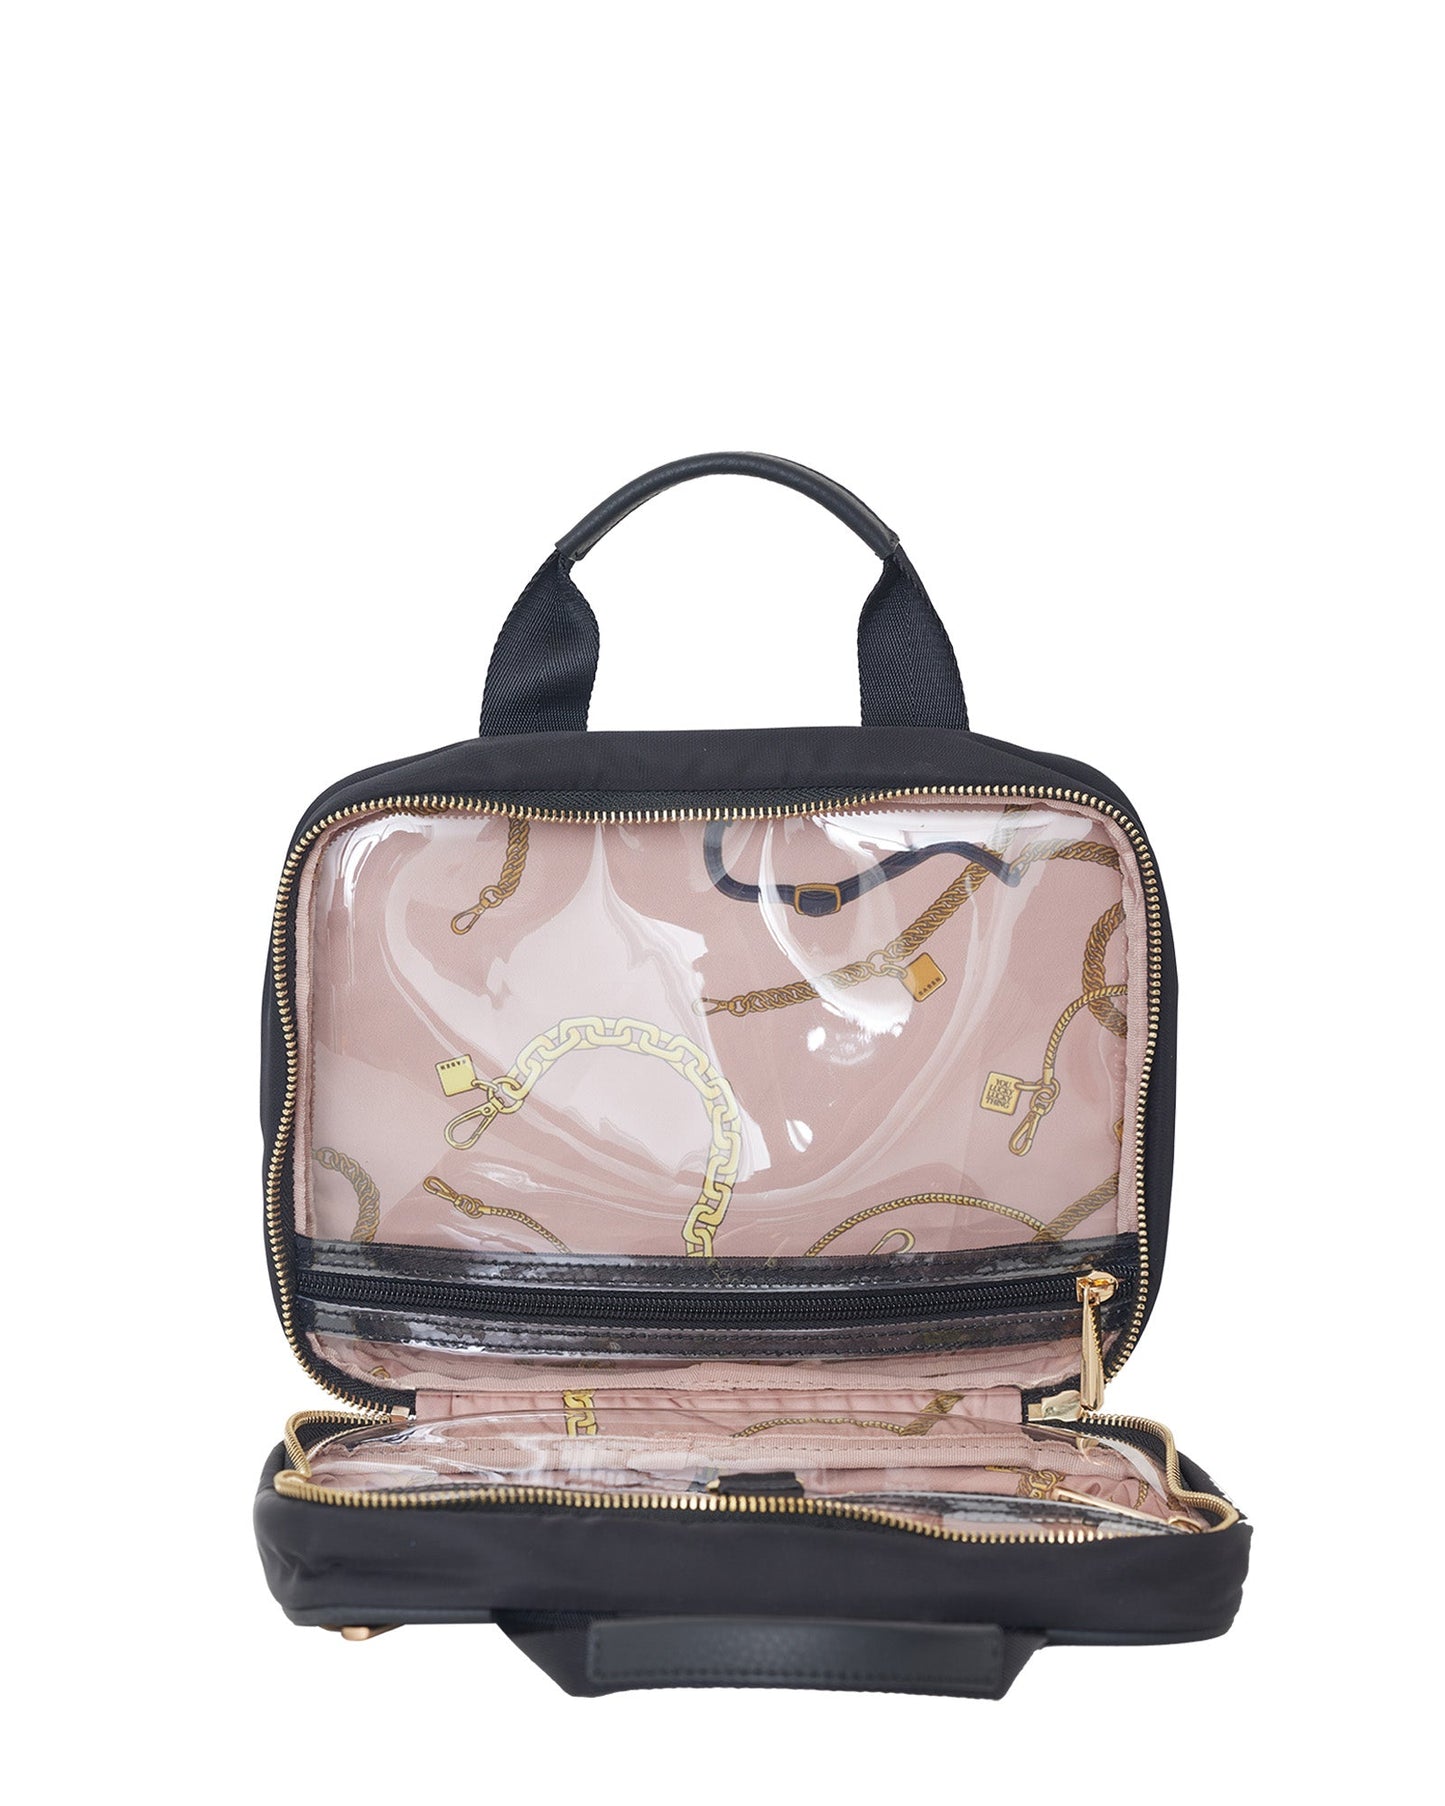 Tanner Toiletry Bag - Black and Chain Print